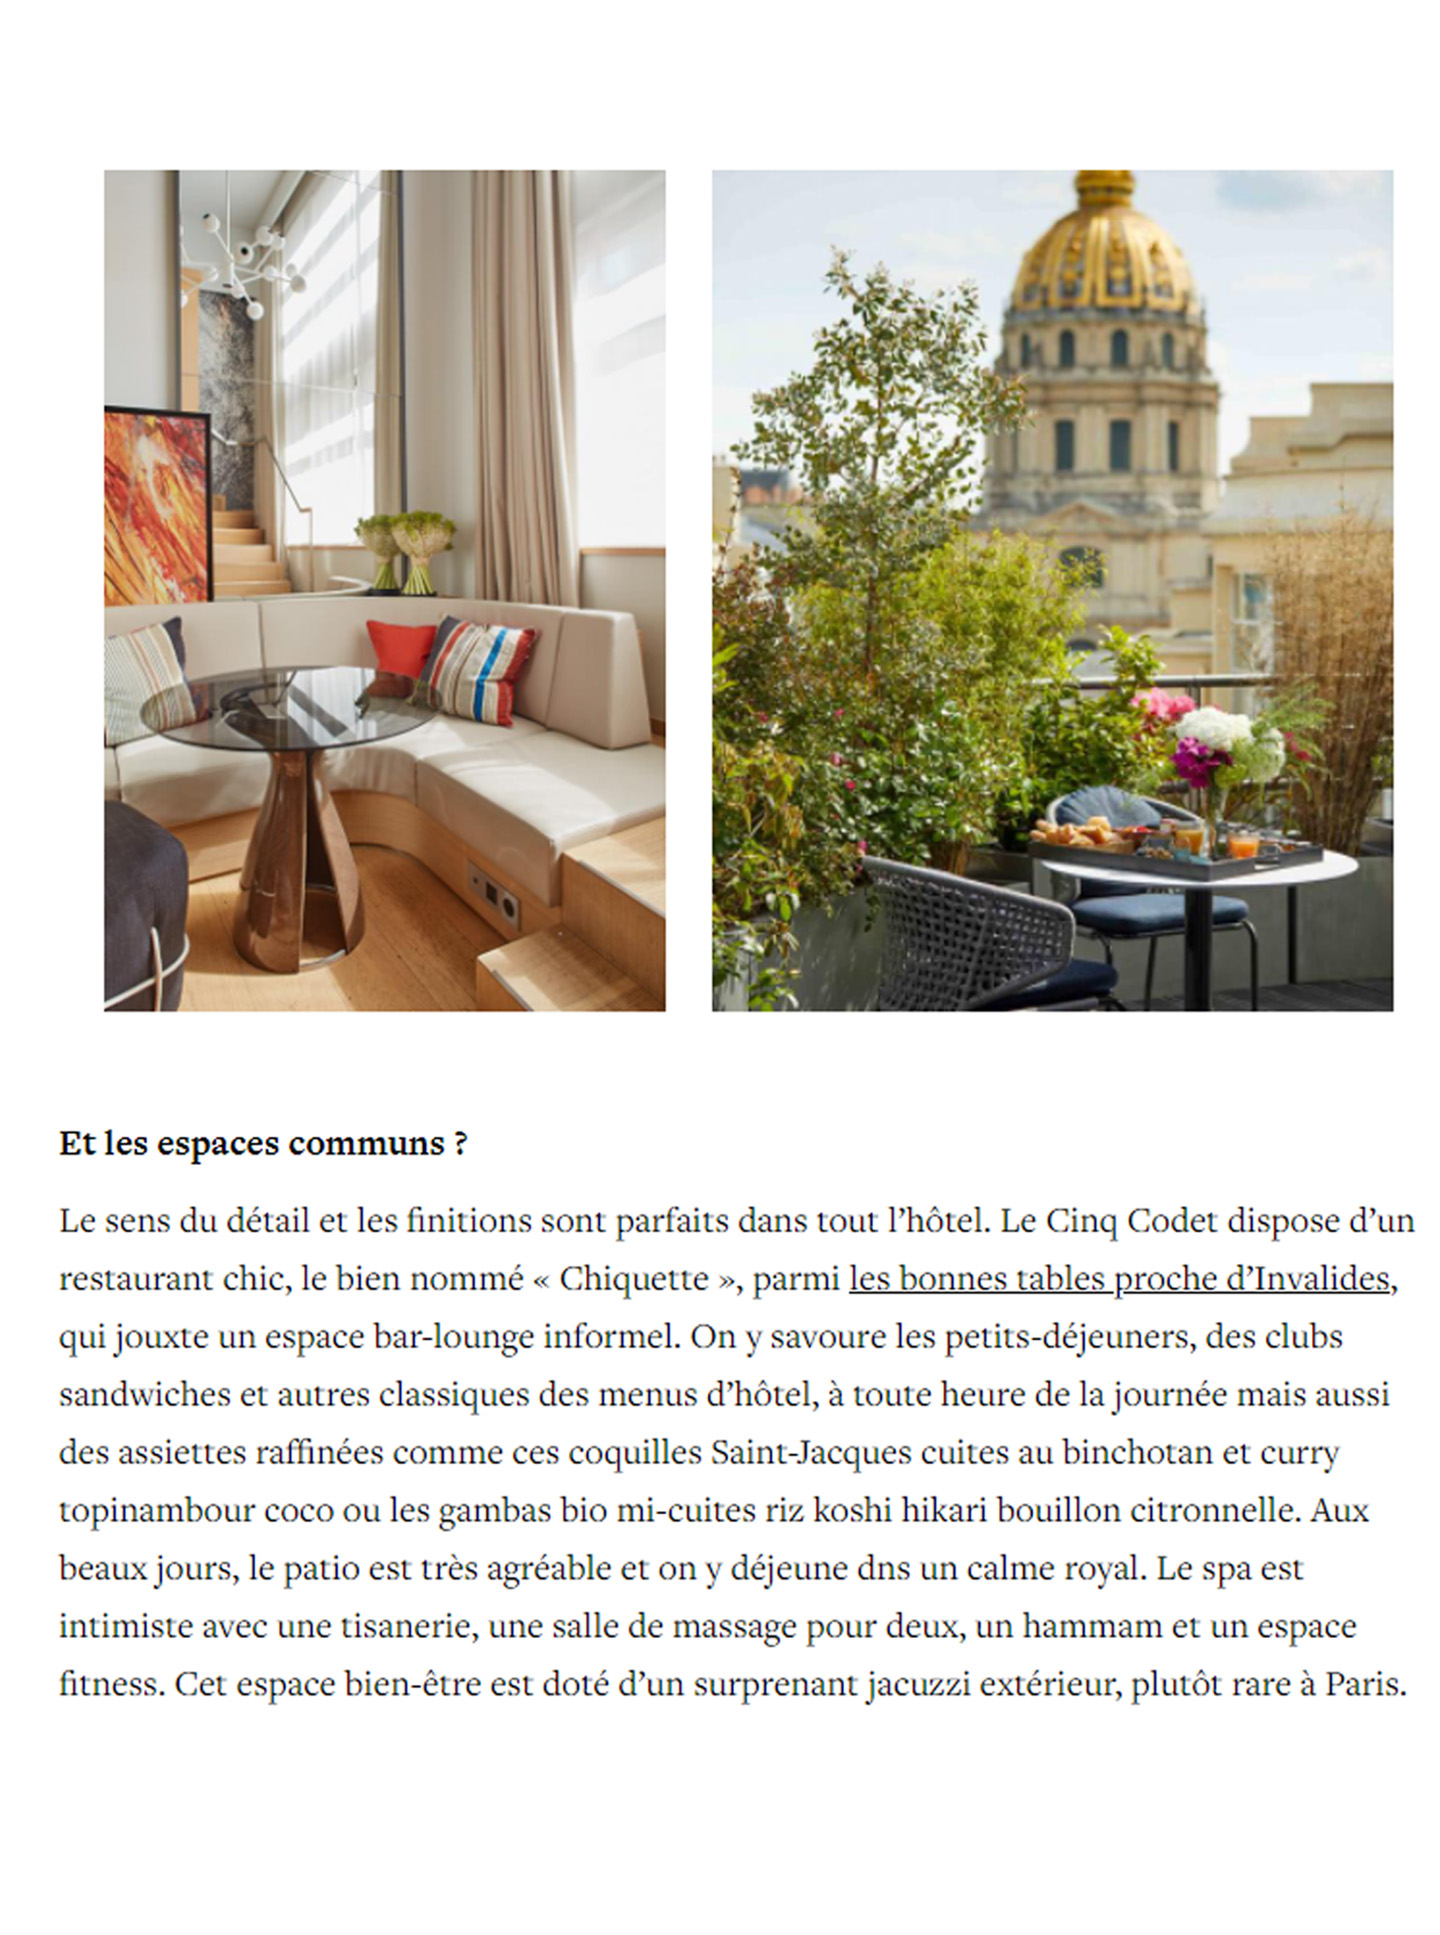 Article on the projects of the interior design studio jean-philippe nuel in the magazine yonder and on the success of the 5 star Lancaster hotel in Paris